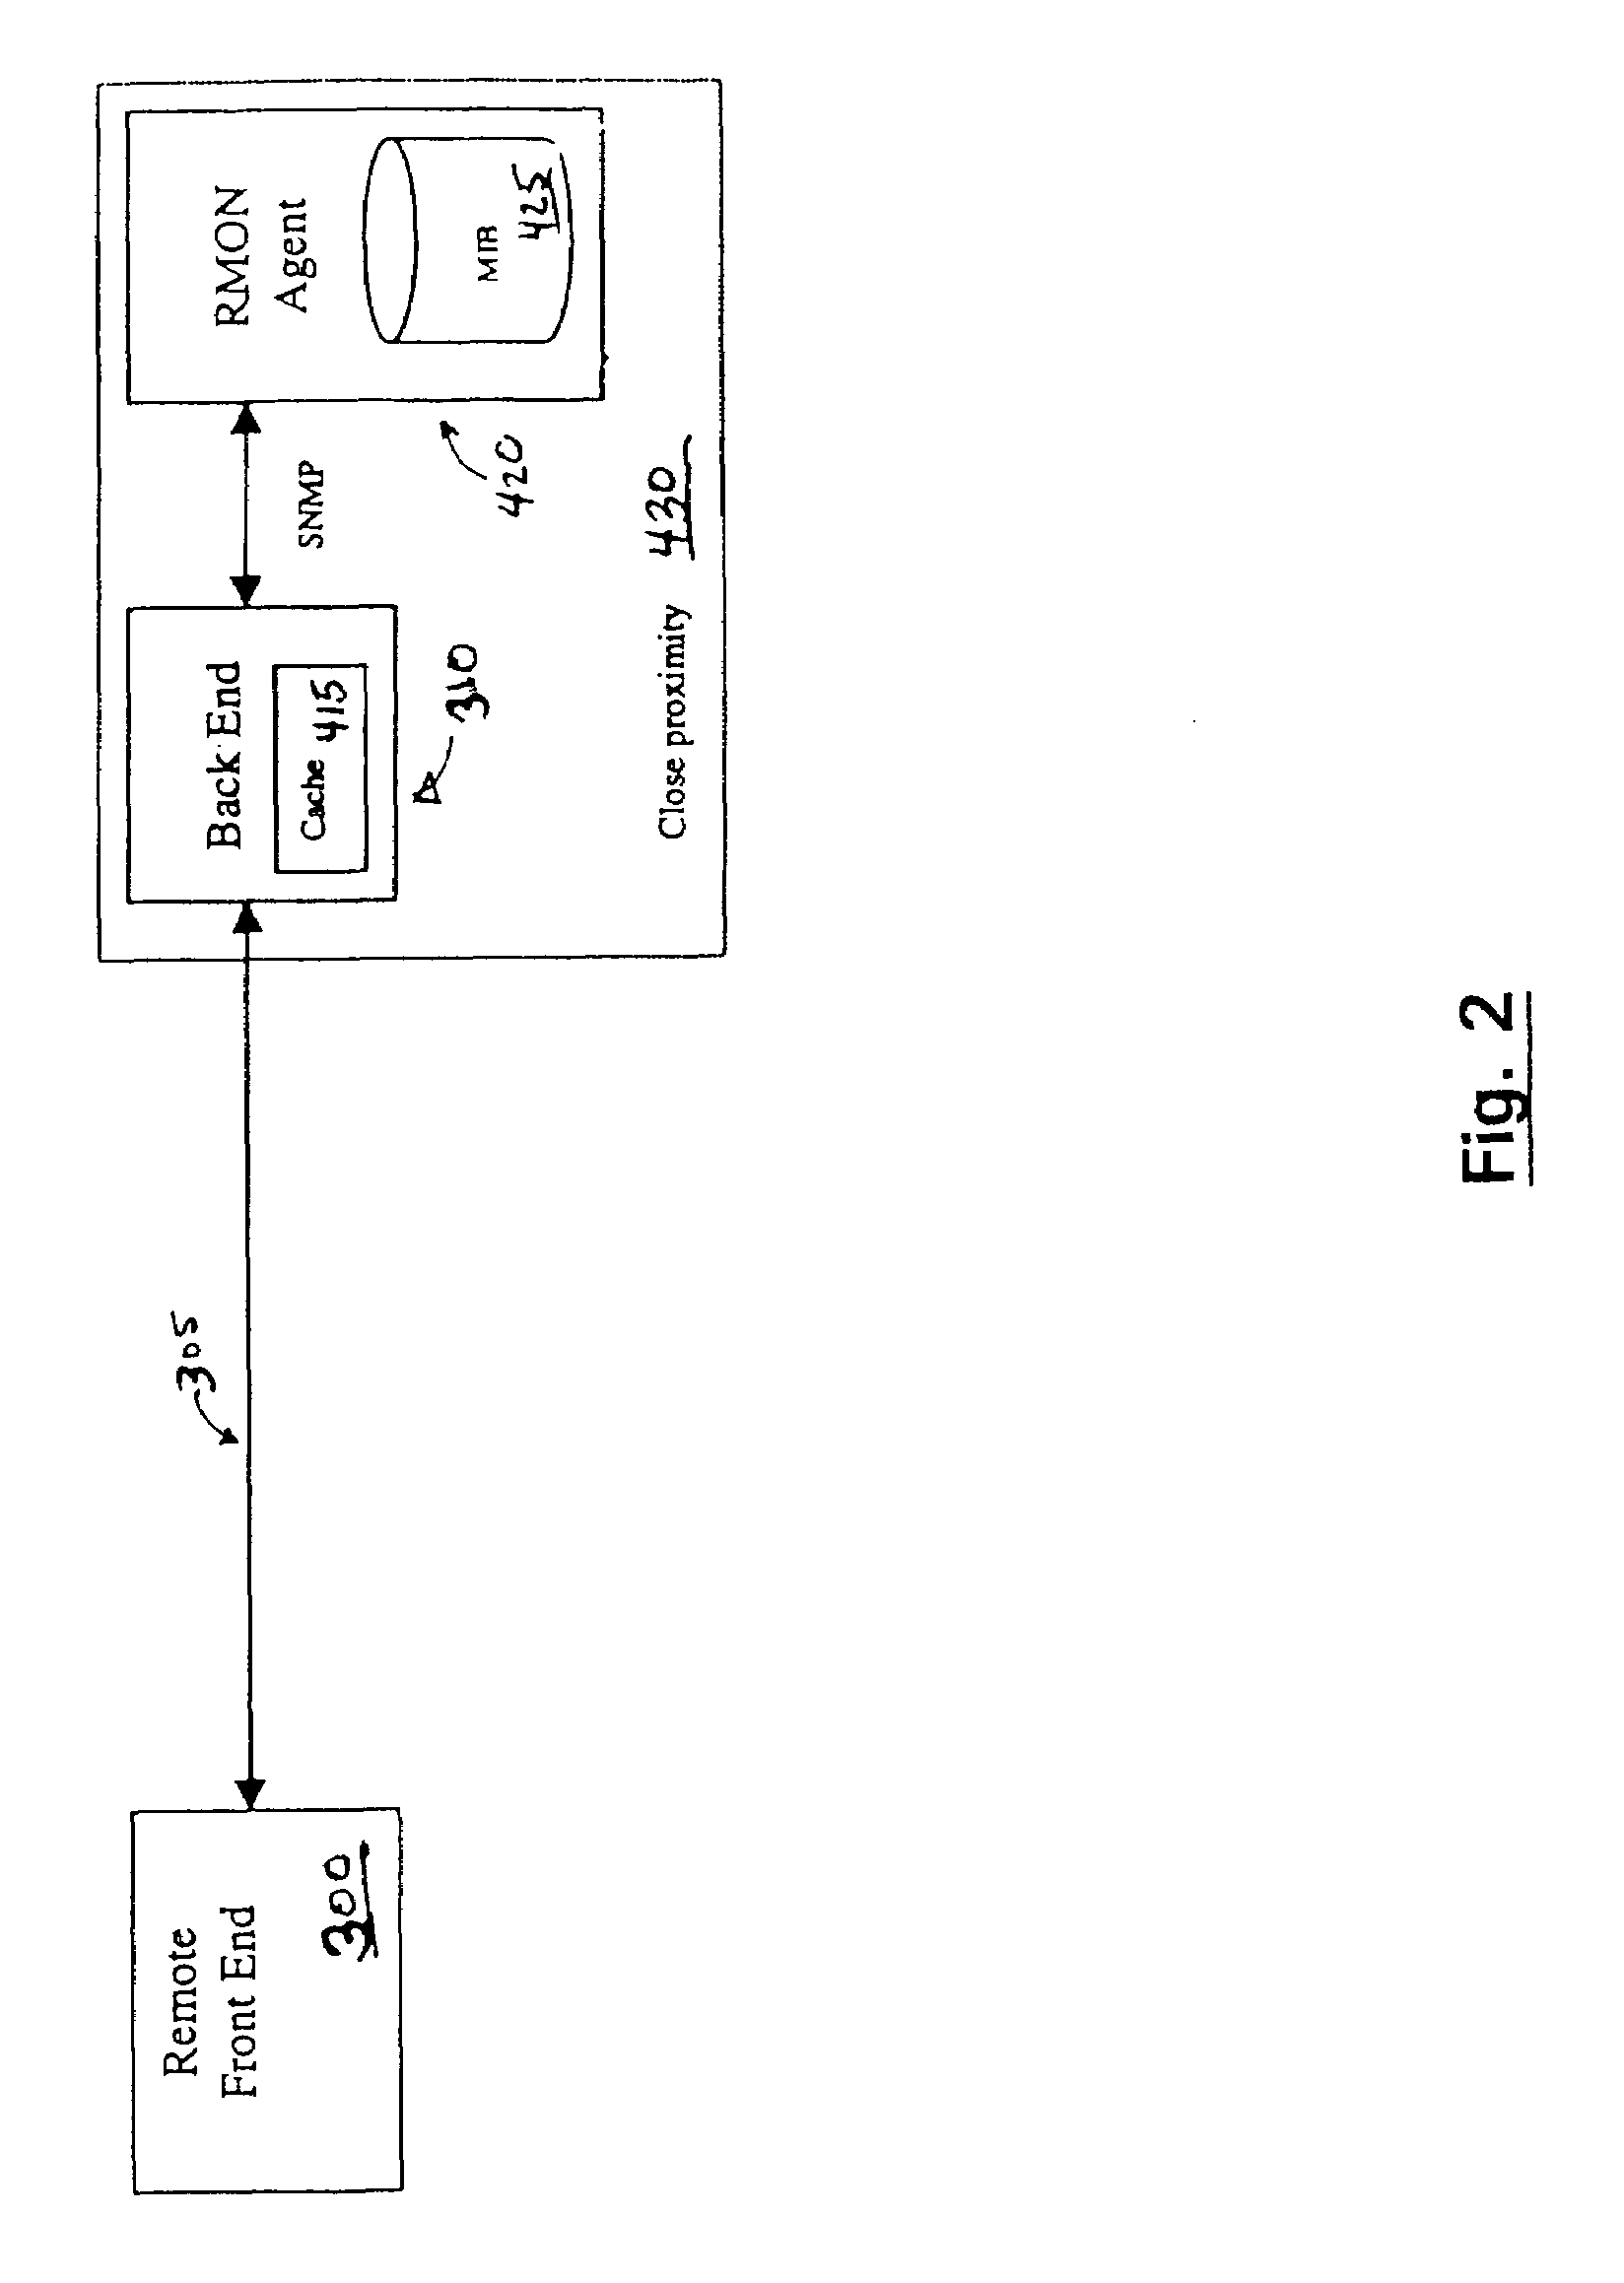 Method and architecture for a high performance cache for distributed, web-based management solutions